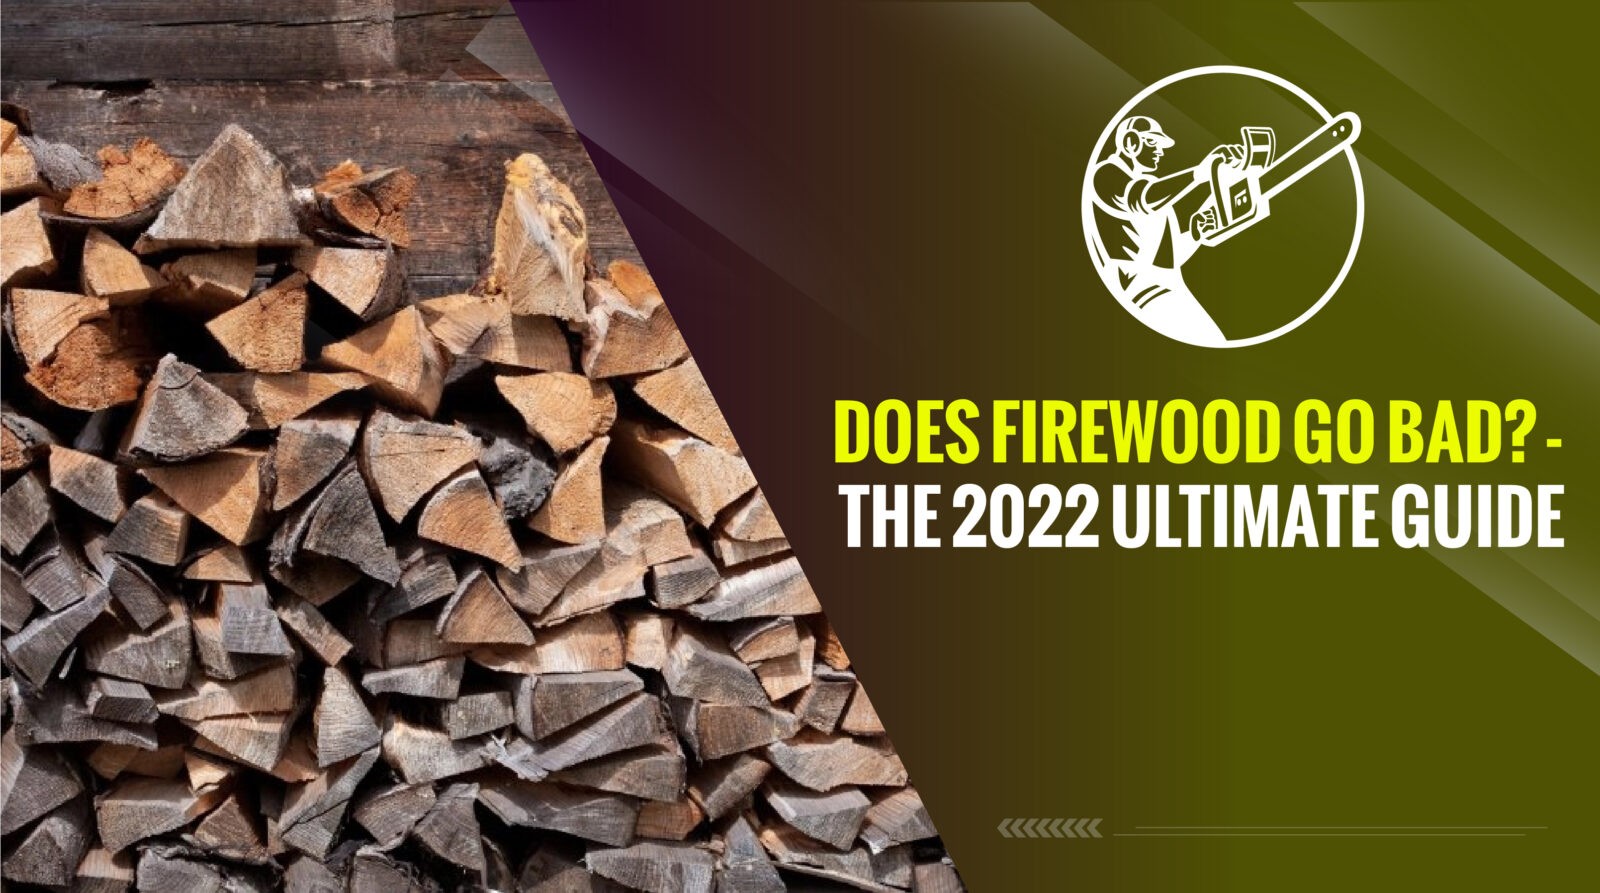 Does Firewood Go Bad The 2022 Ultimate Guide 